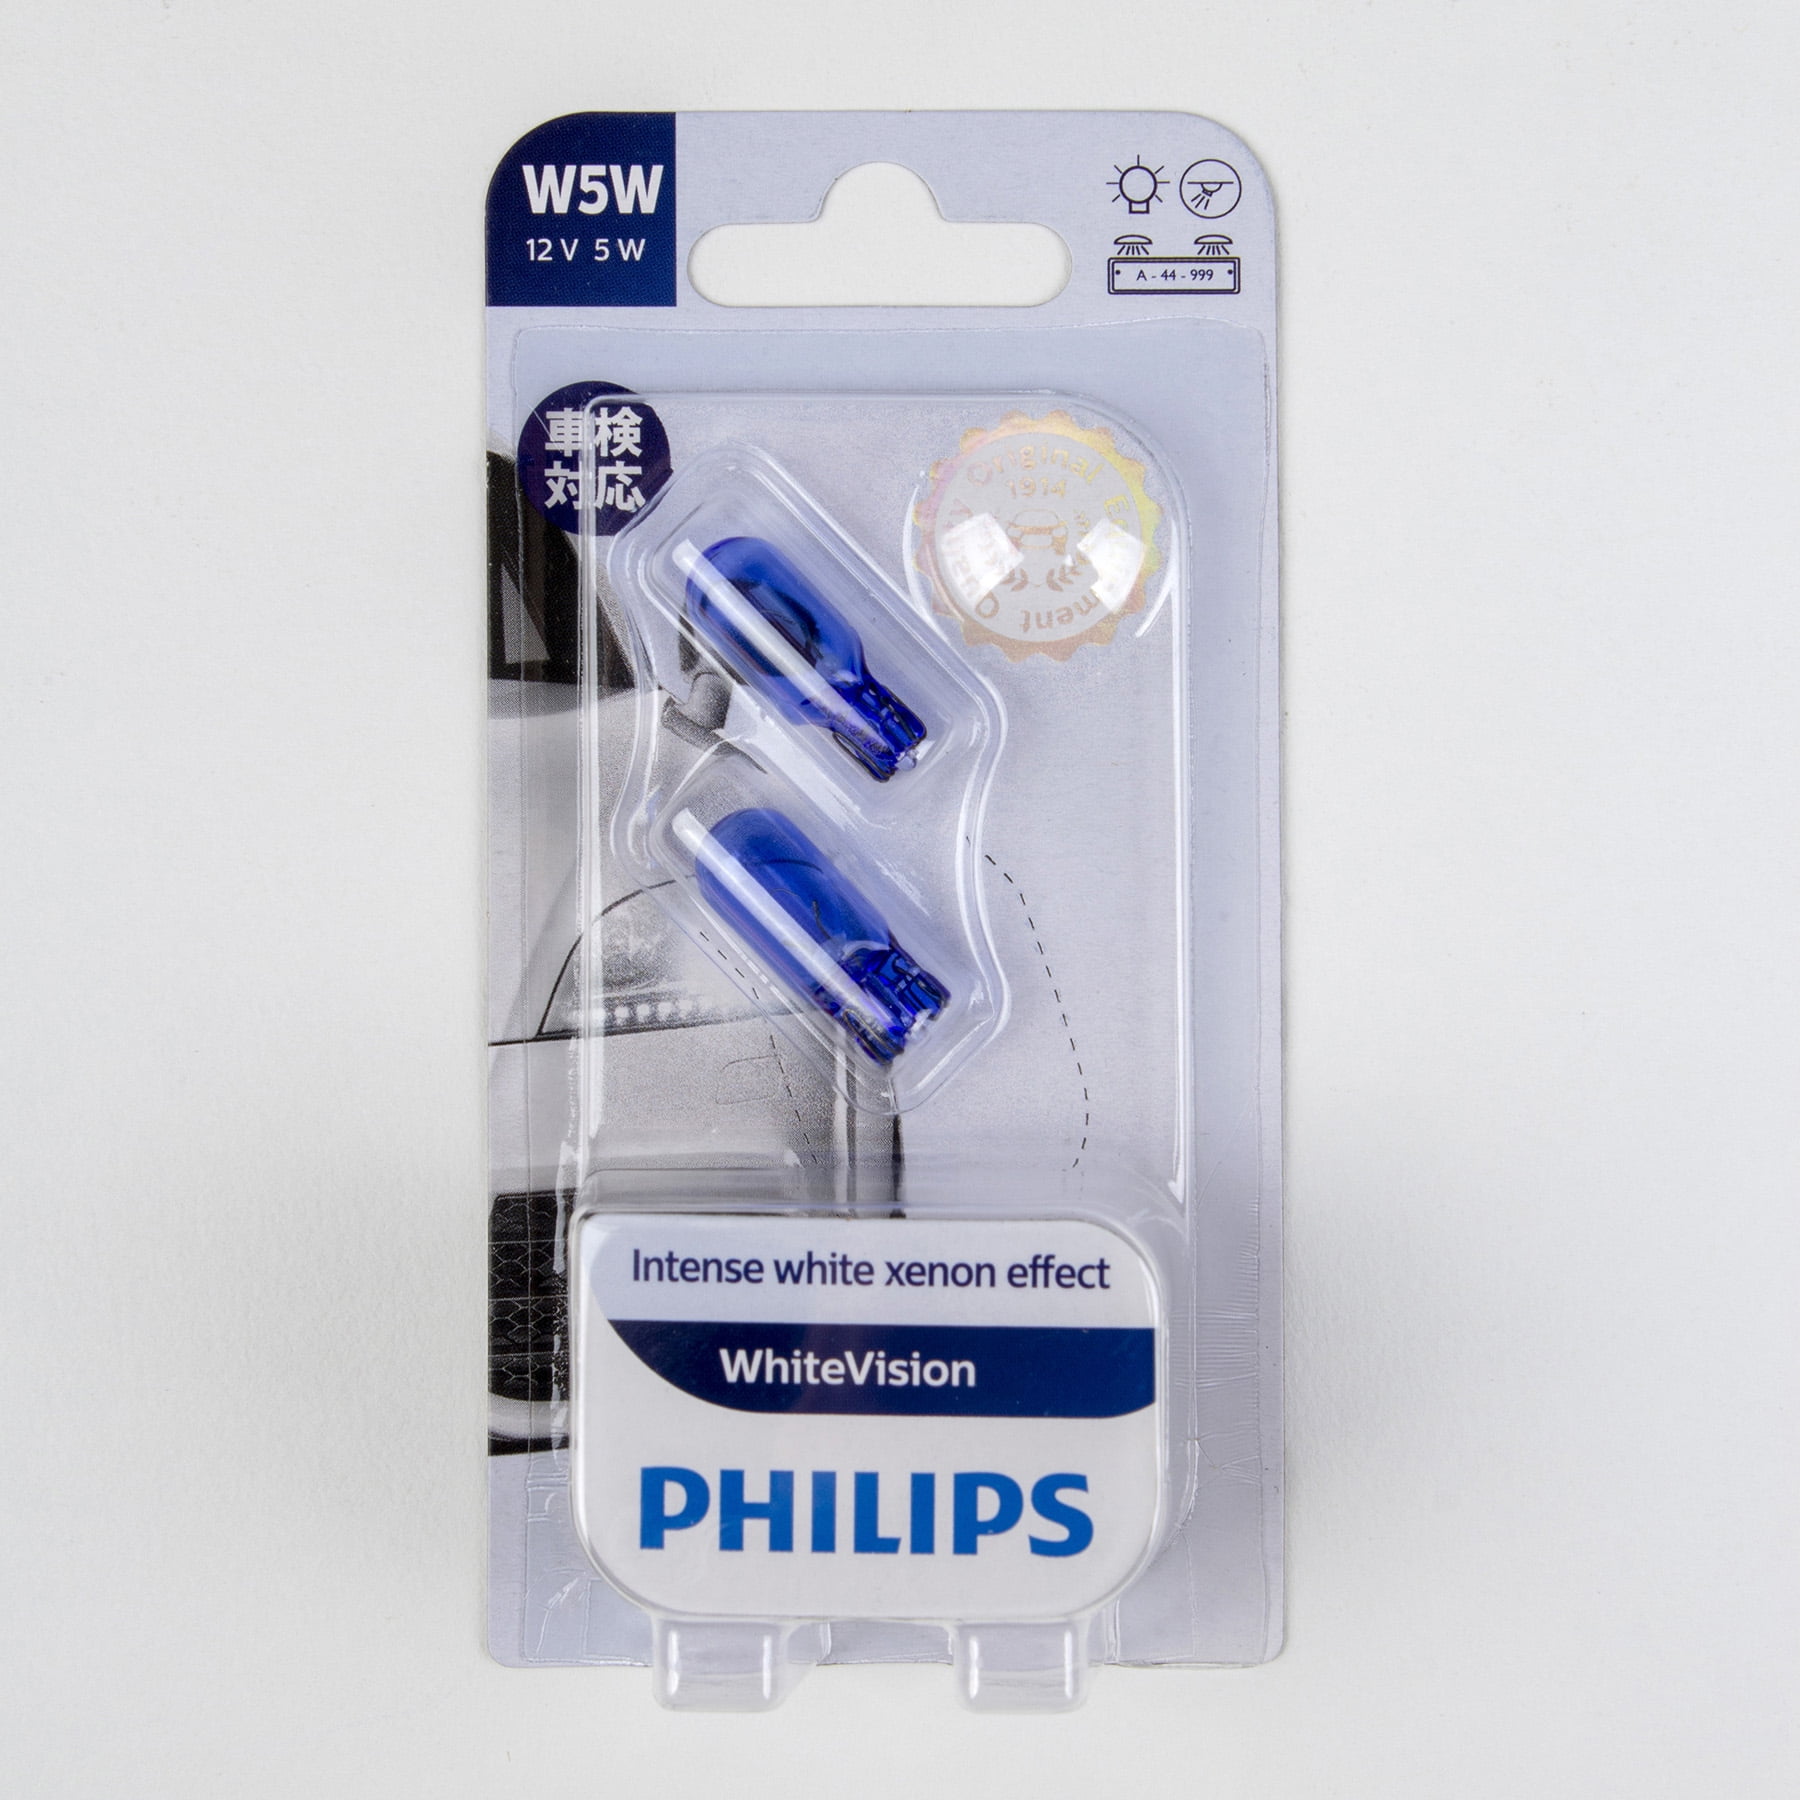 Philips Rephilips Led T10 W5w 6000k Signal Lamp 2-pack For